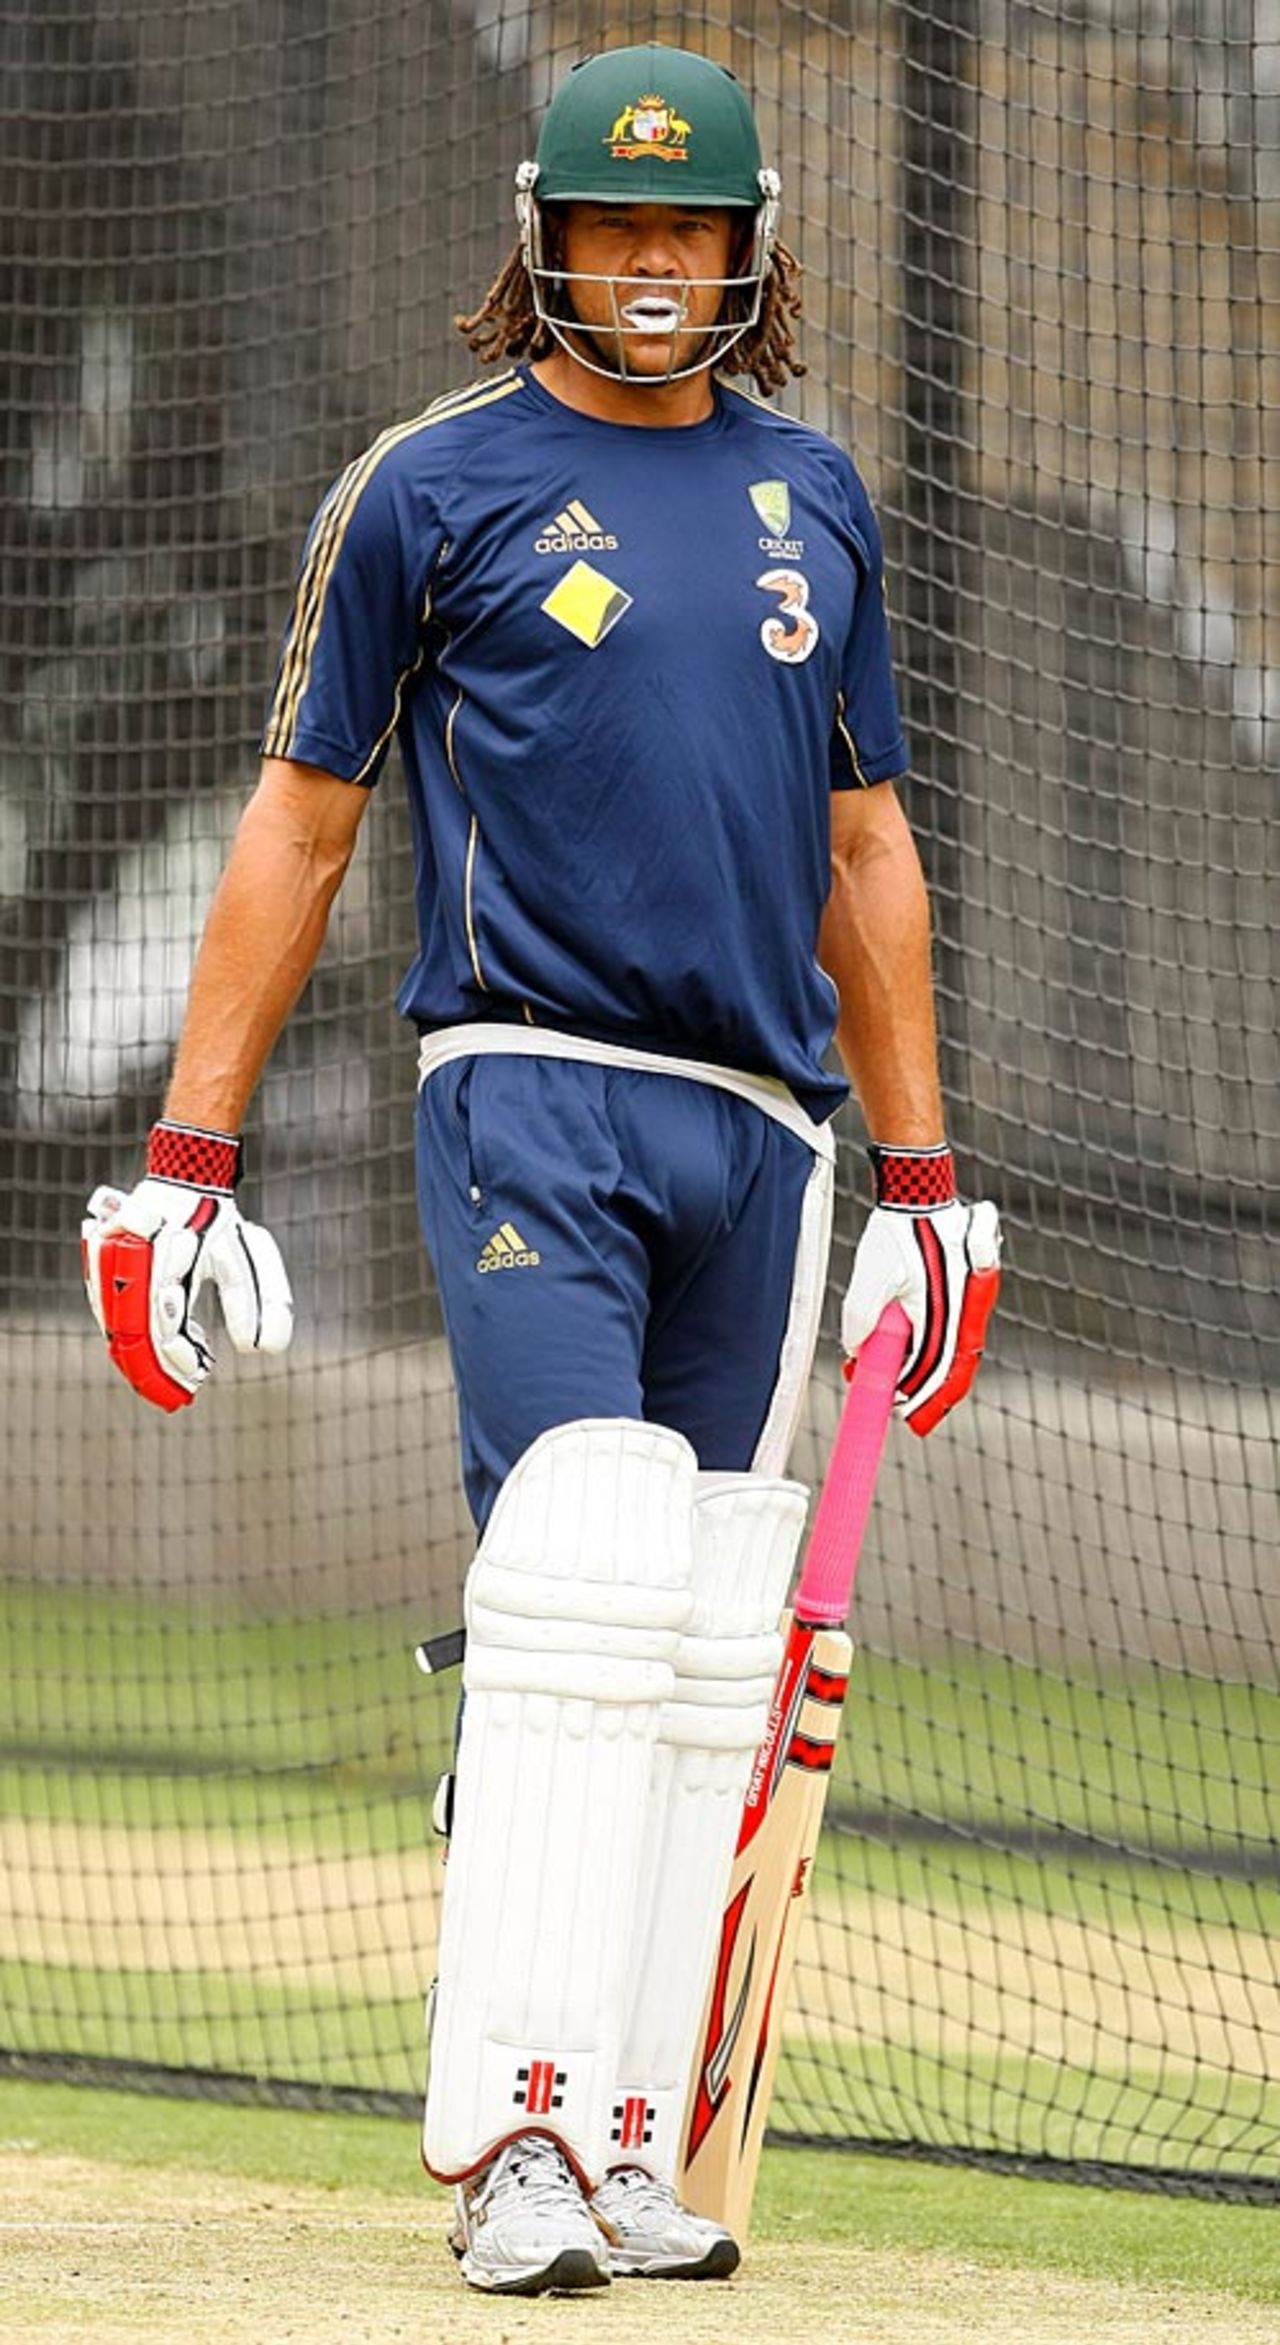 Andrew Symonds gears up for a bat at the nets, Melbourne, December 23, 2008